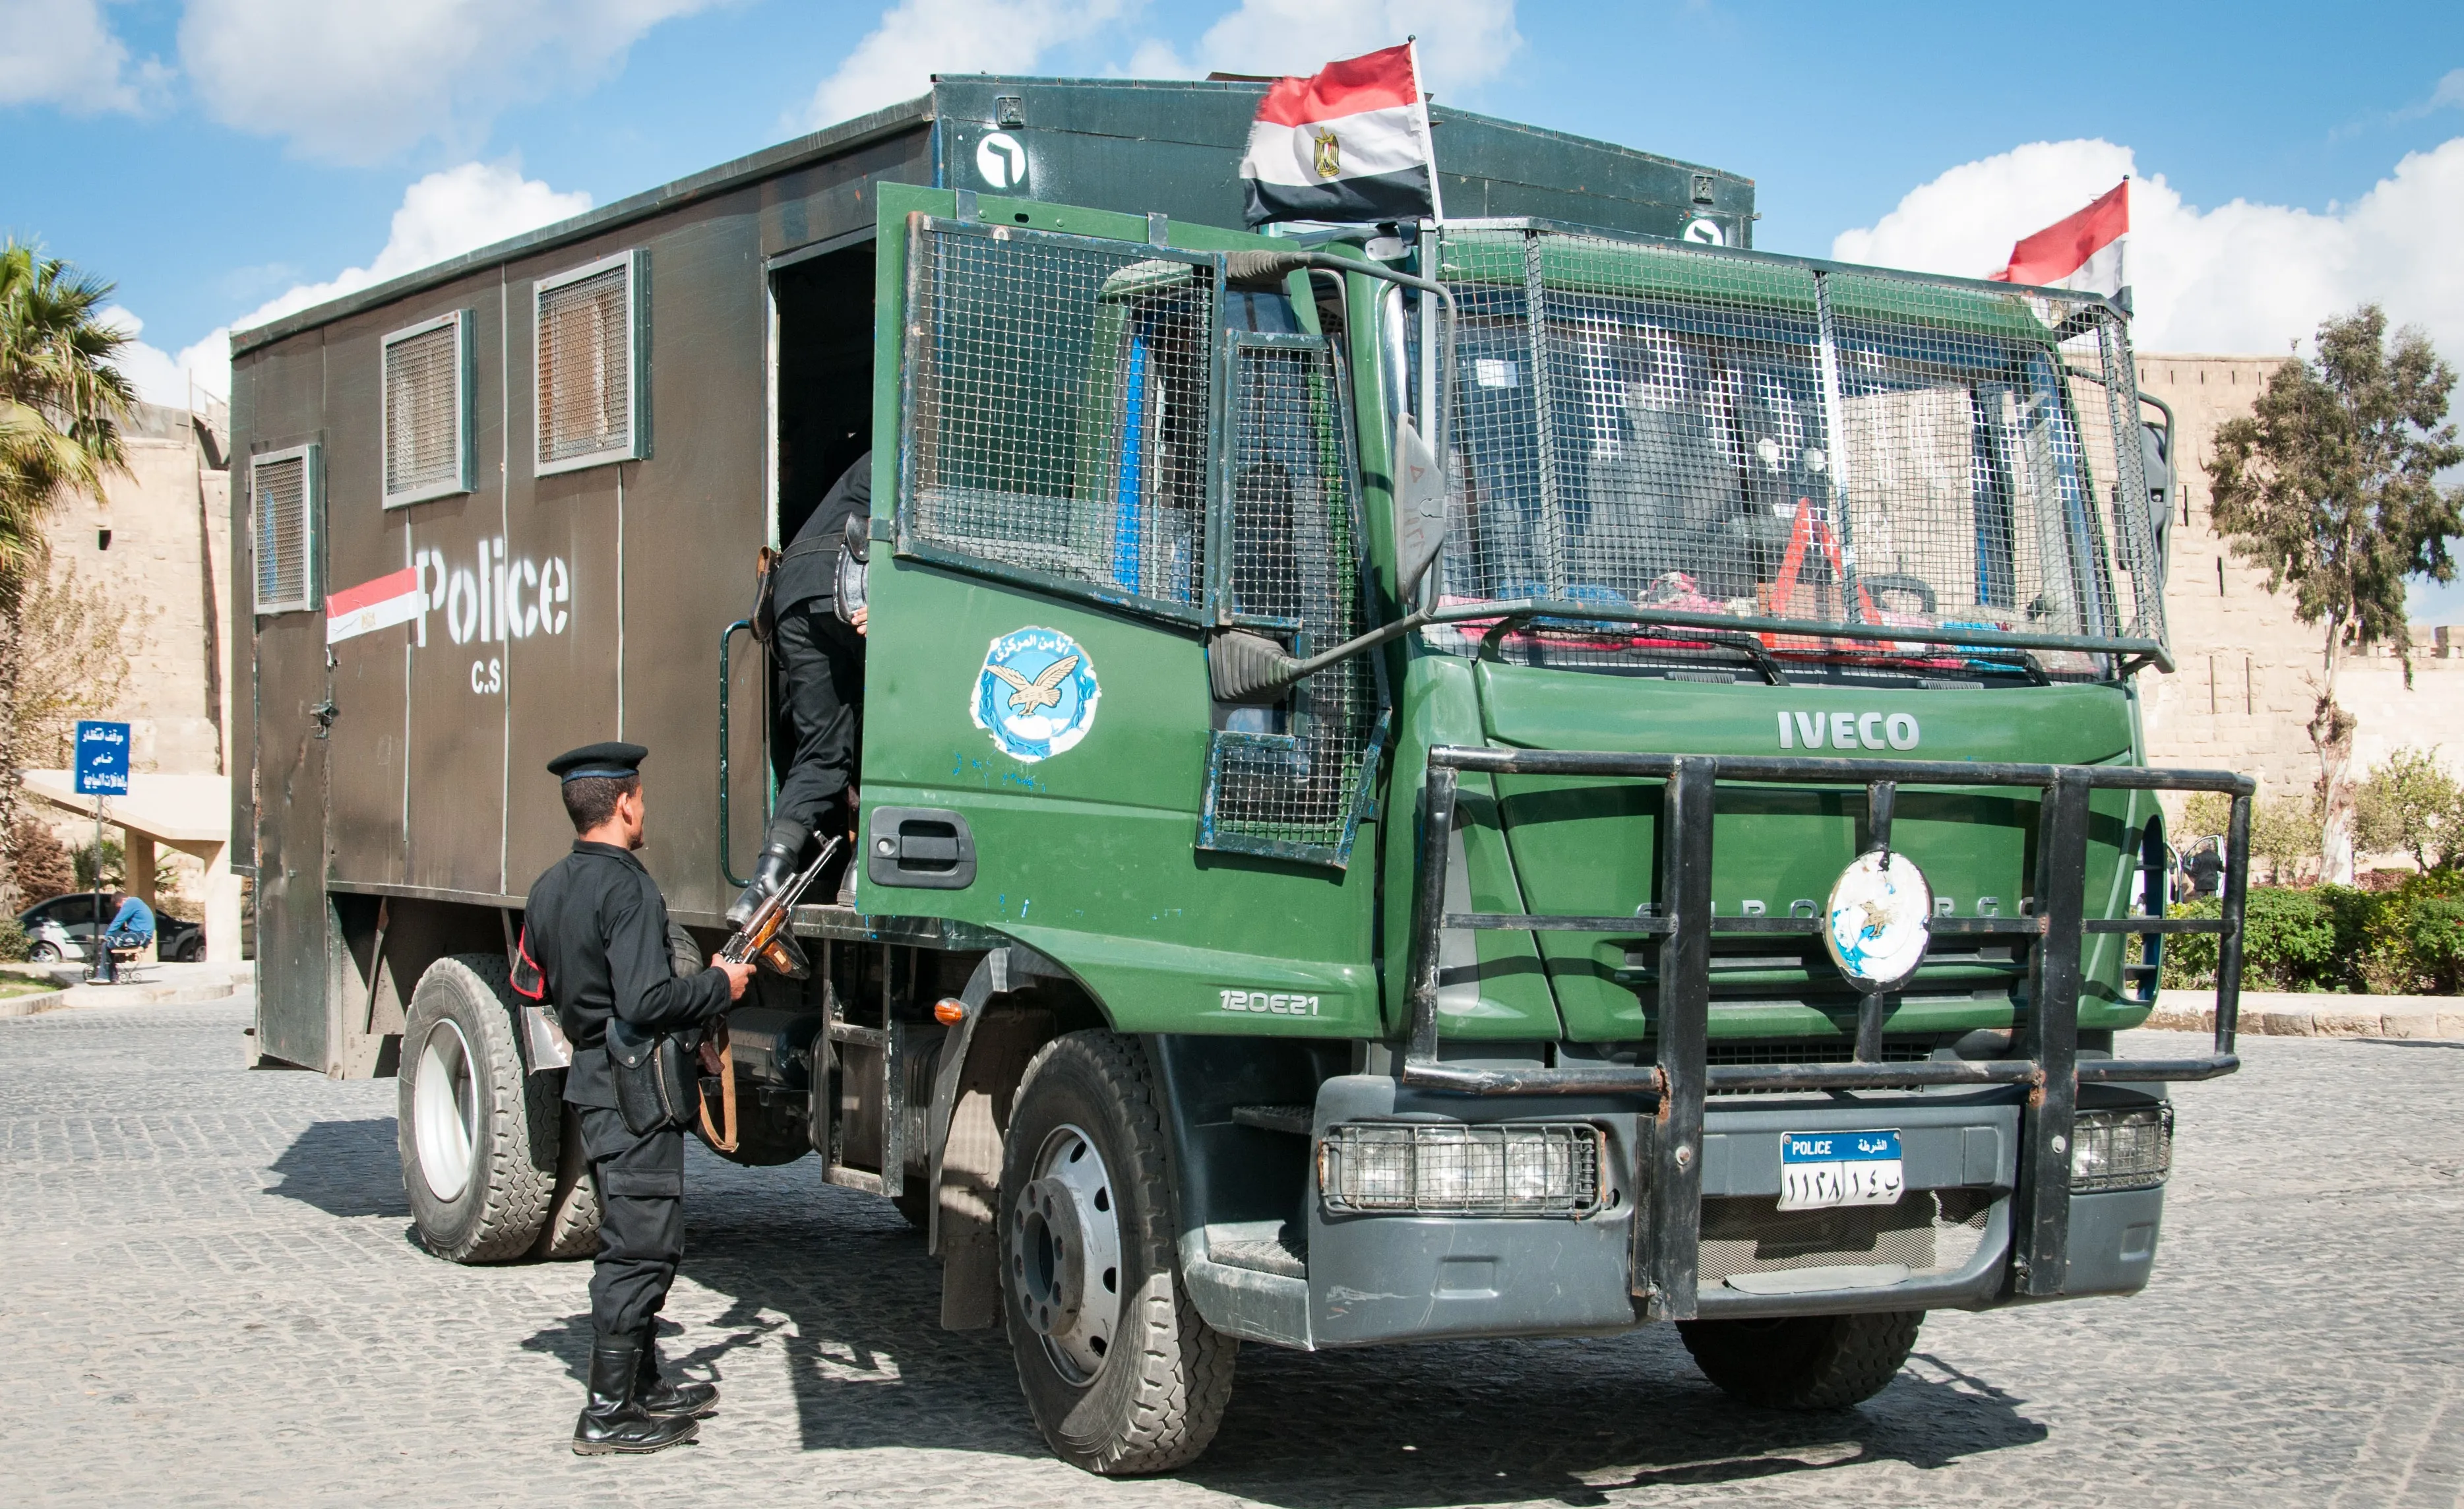 egyptian iveco police truck1